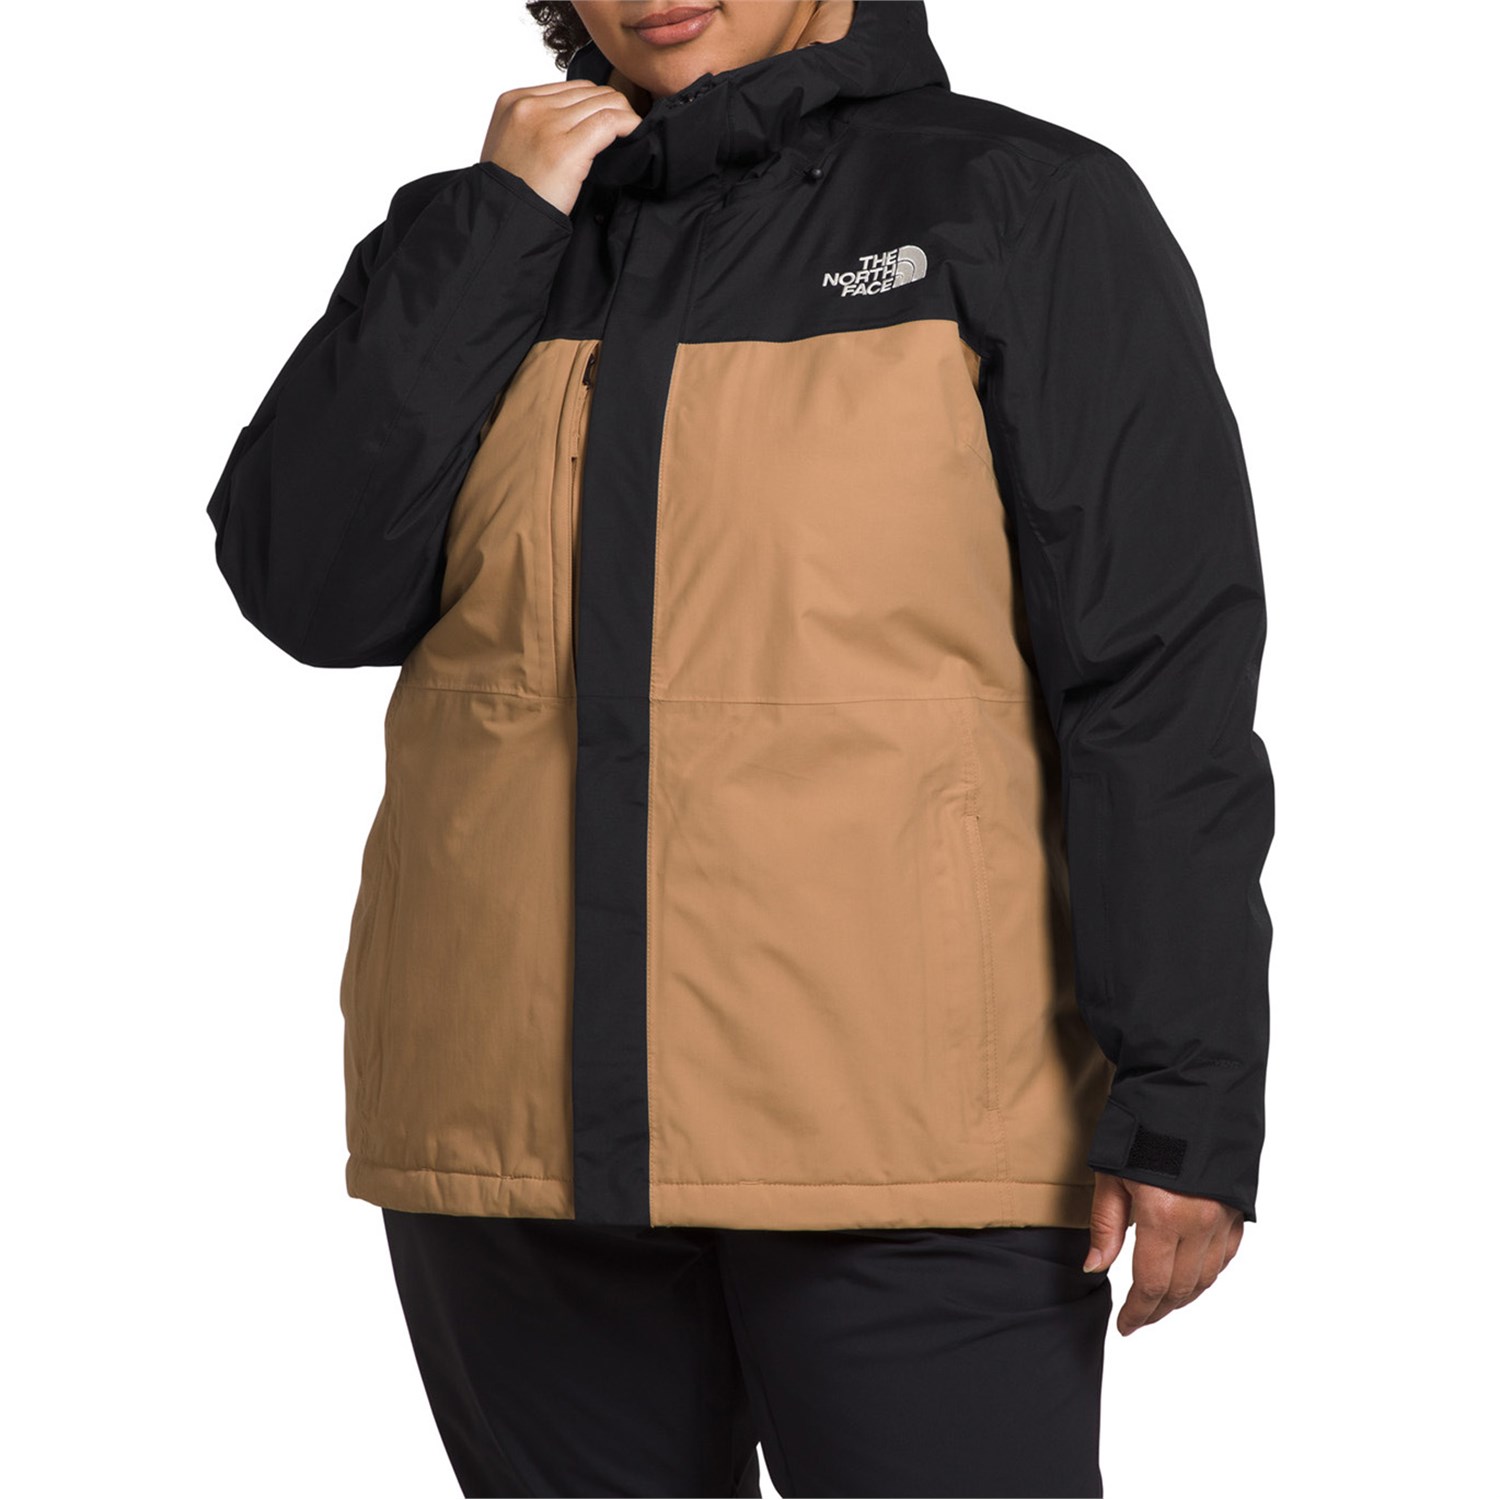 Куртка The North Face Freedom Insulated Plus, цвет TNF Black/Almond Butter куртка the north face insulated белый черный